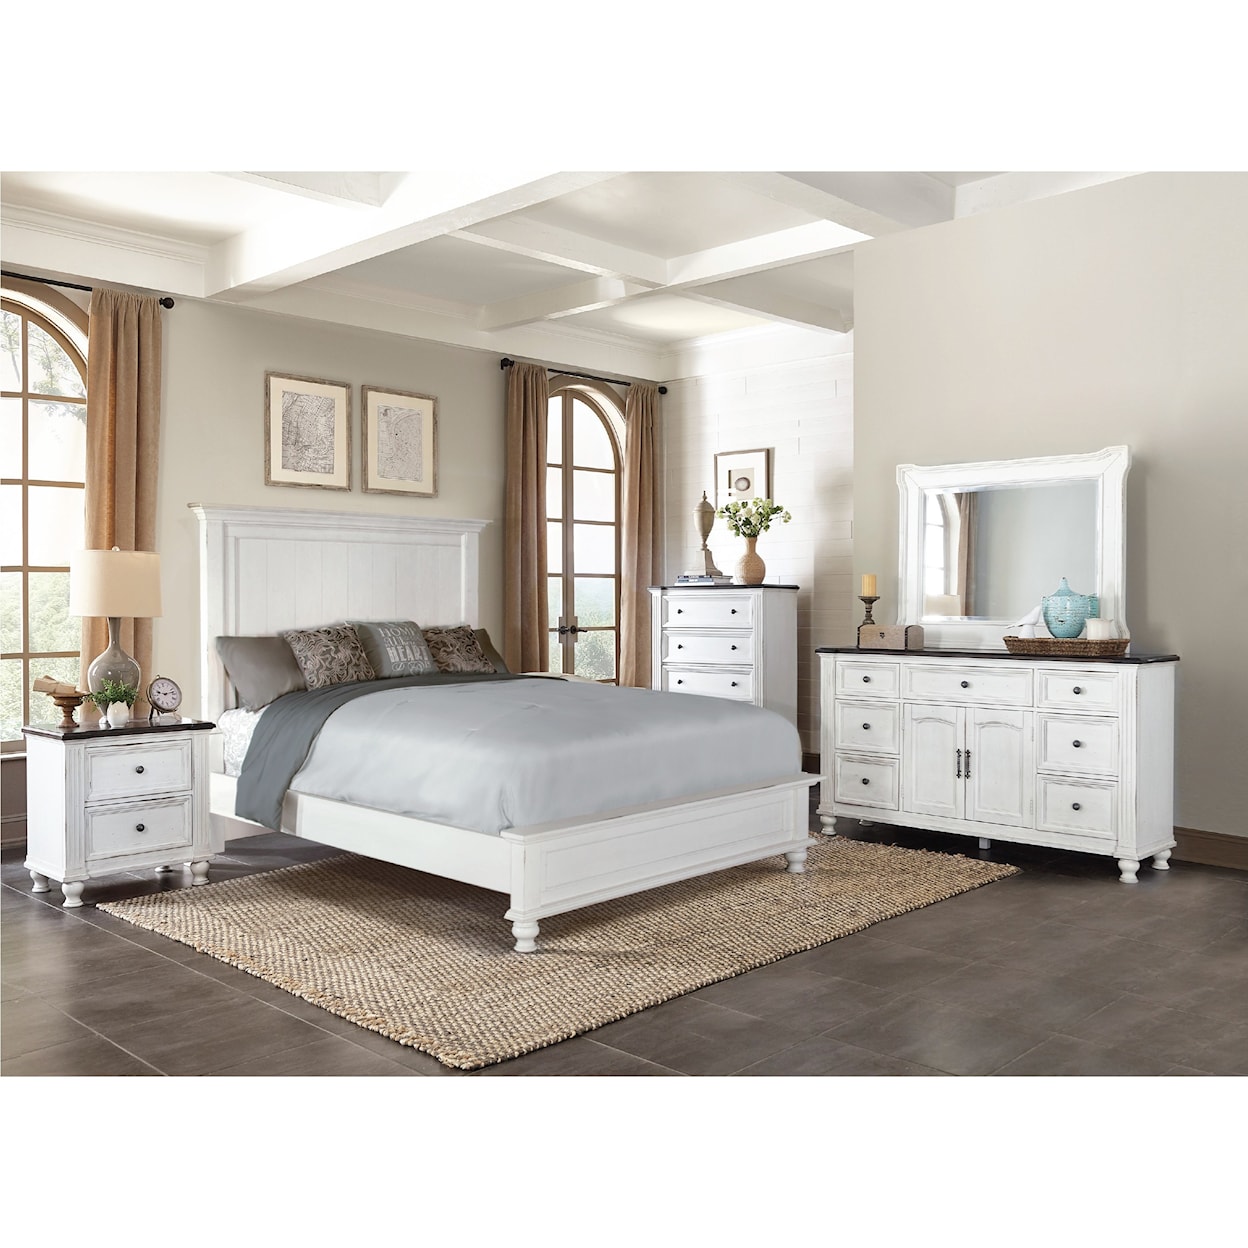 Sunny Designs Carriage House Queen Platform Bed